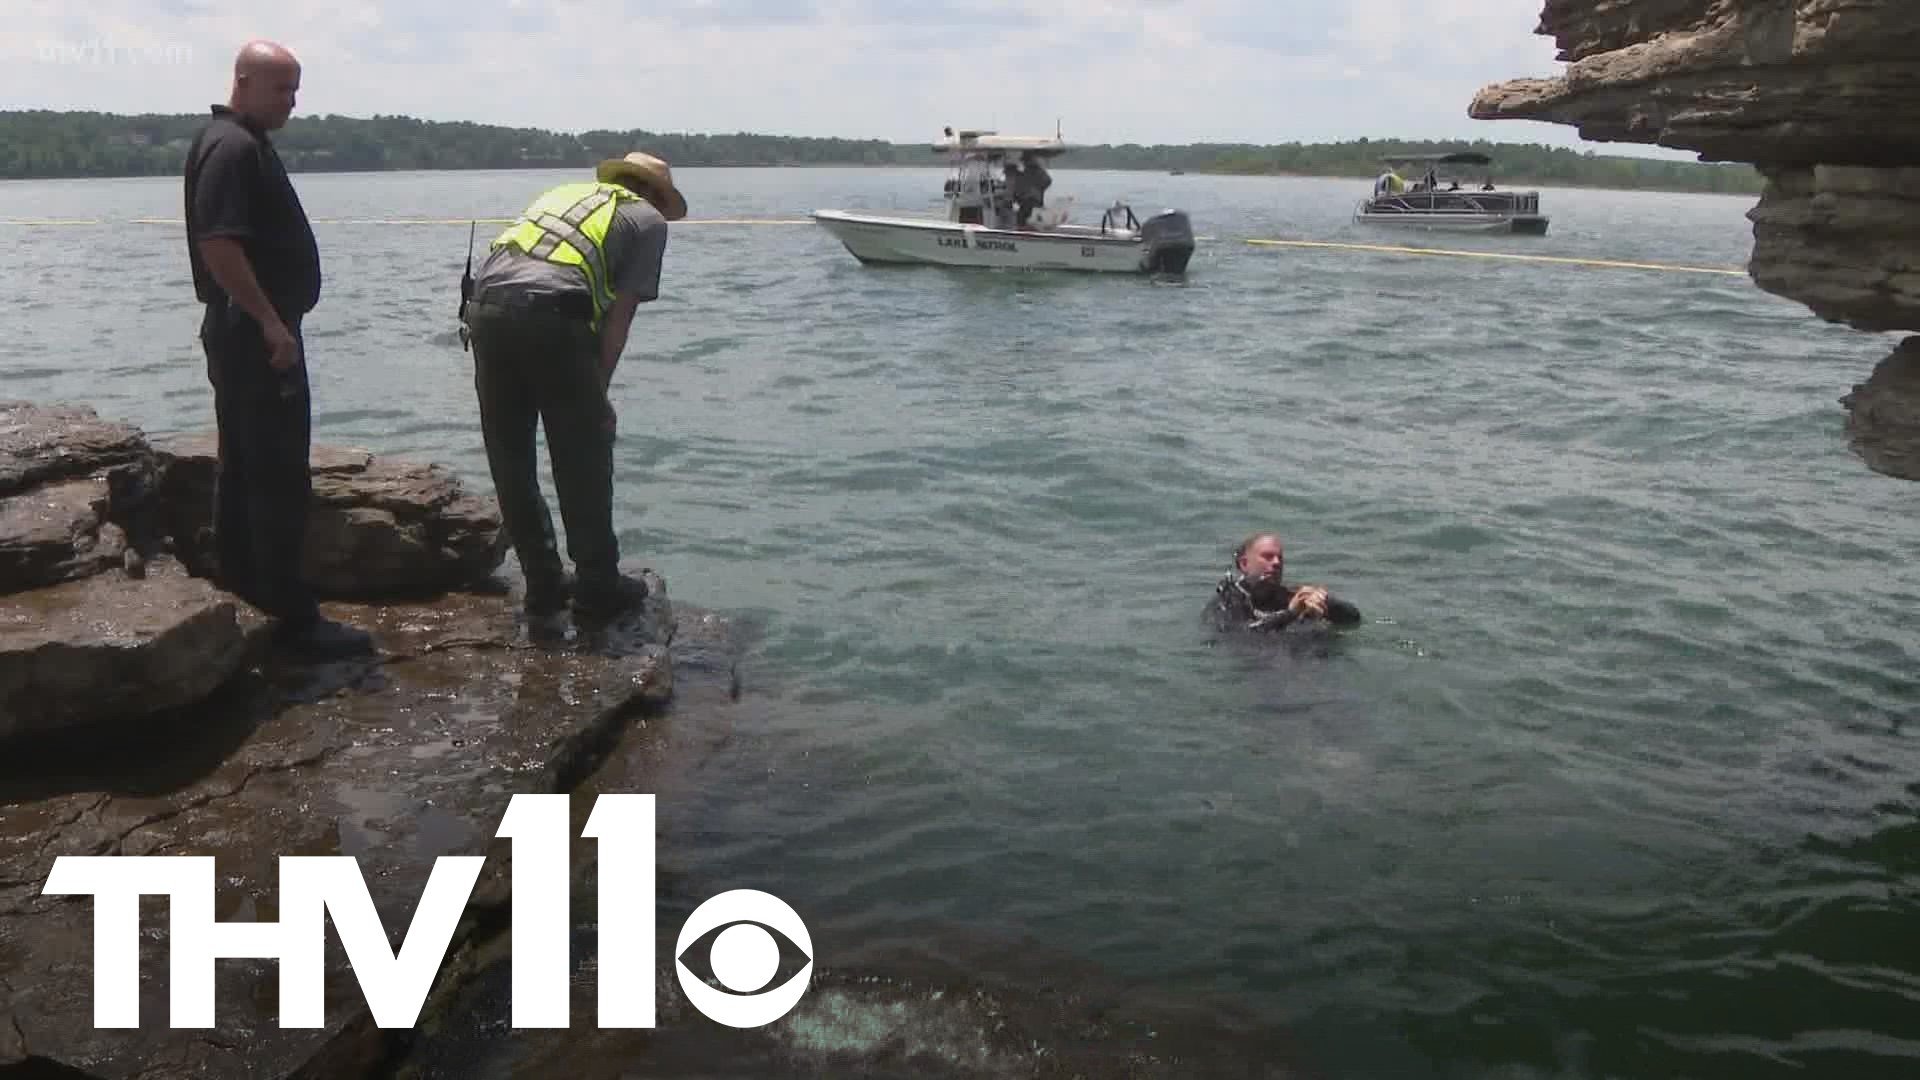 For the second time in 24 hours, rescuers are searching for a potential drowning victim at Greers Ferry Lake in Arkansas.